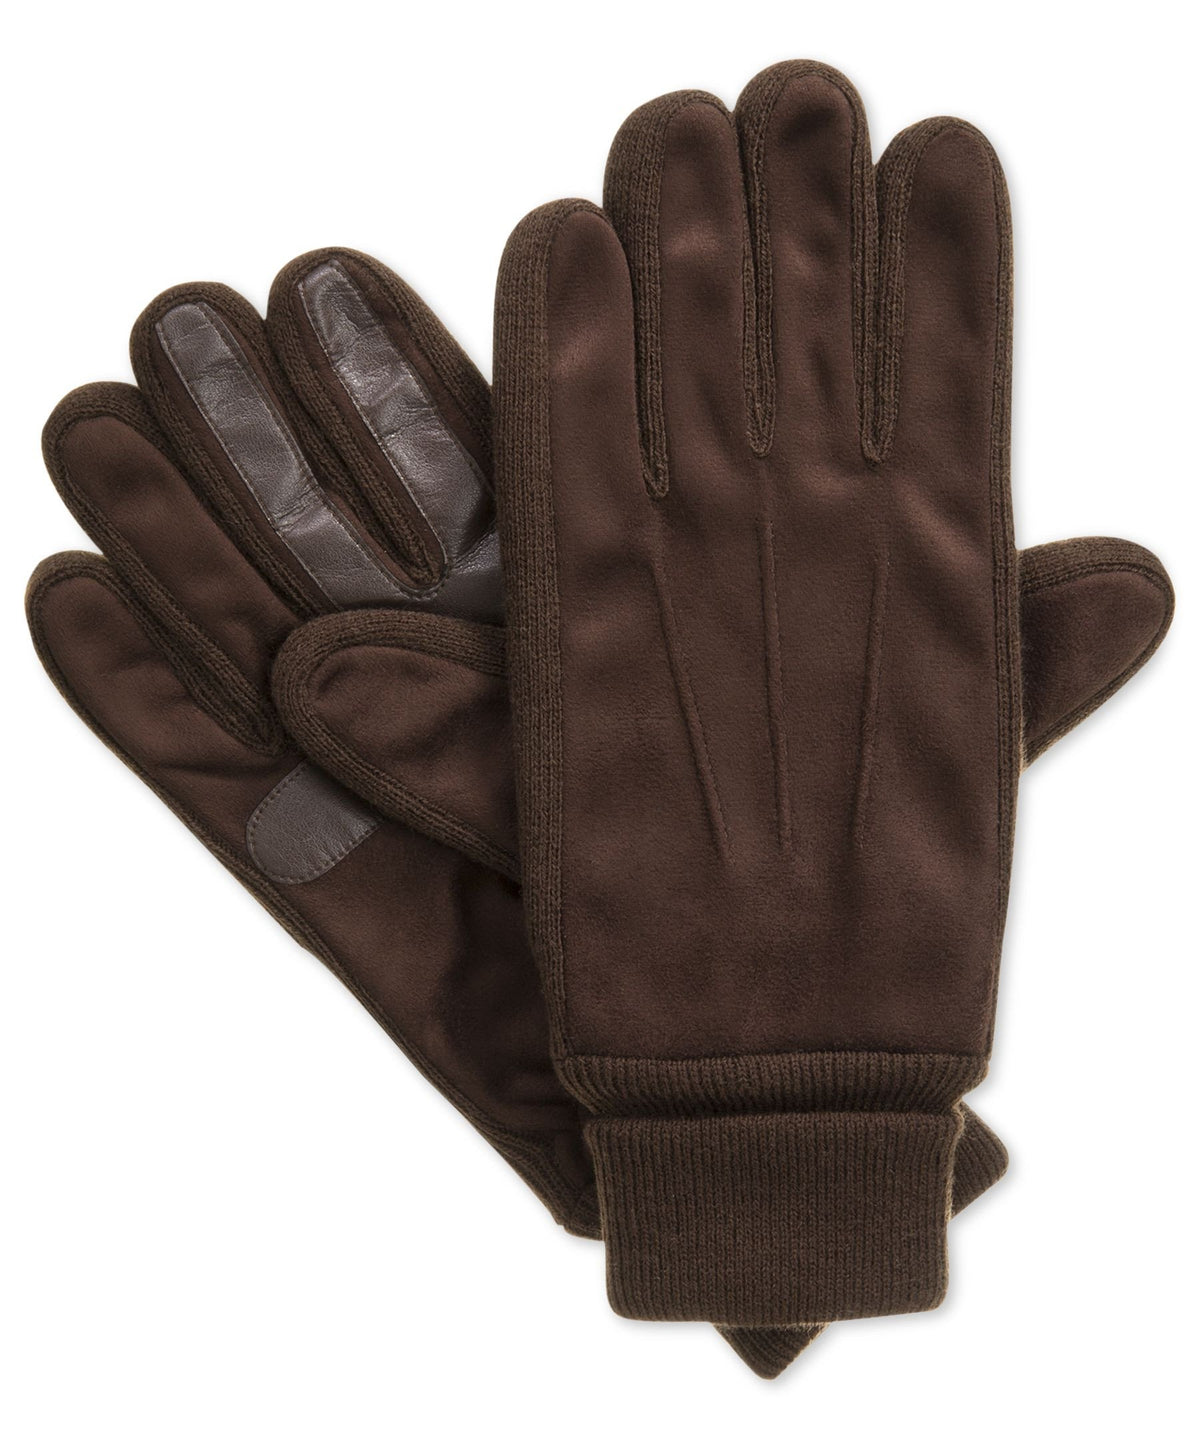 Isotoner Signature Brown Fleece SmarTouch Brushed Micro Glove